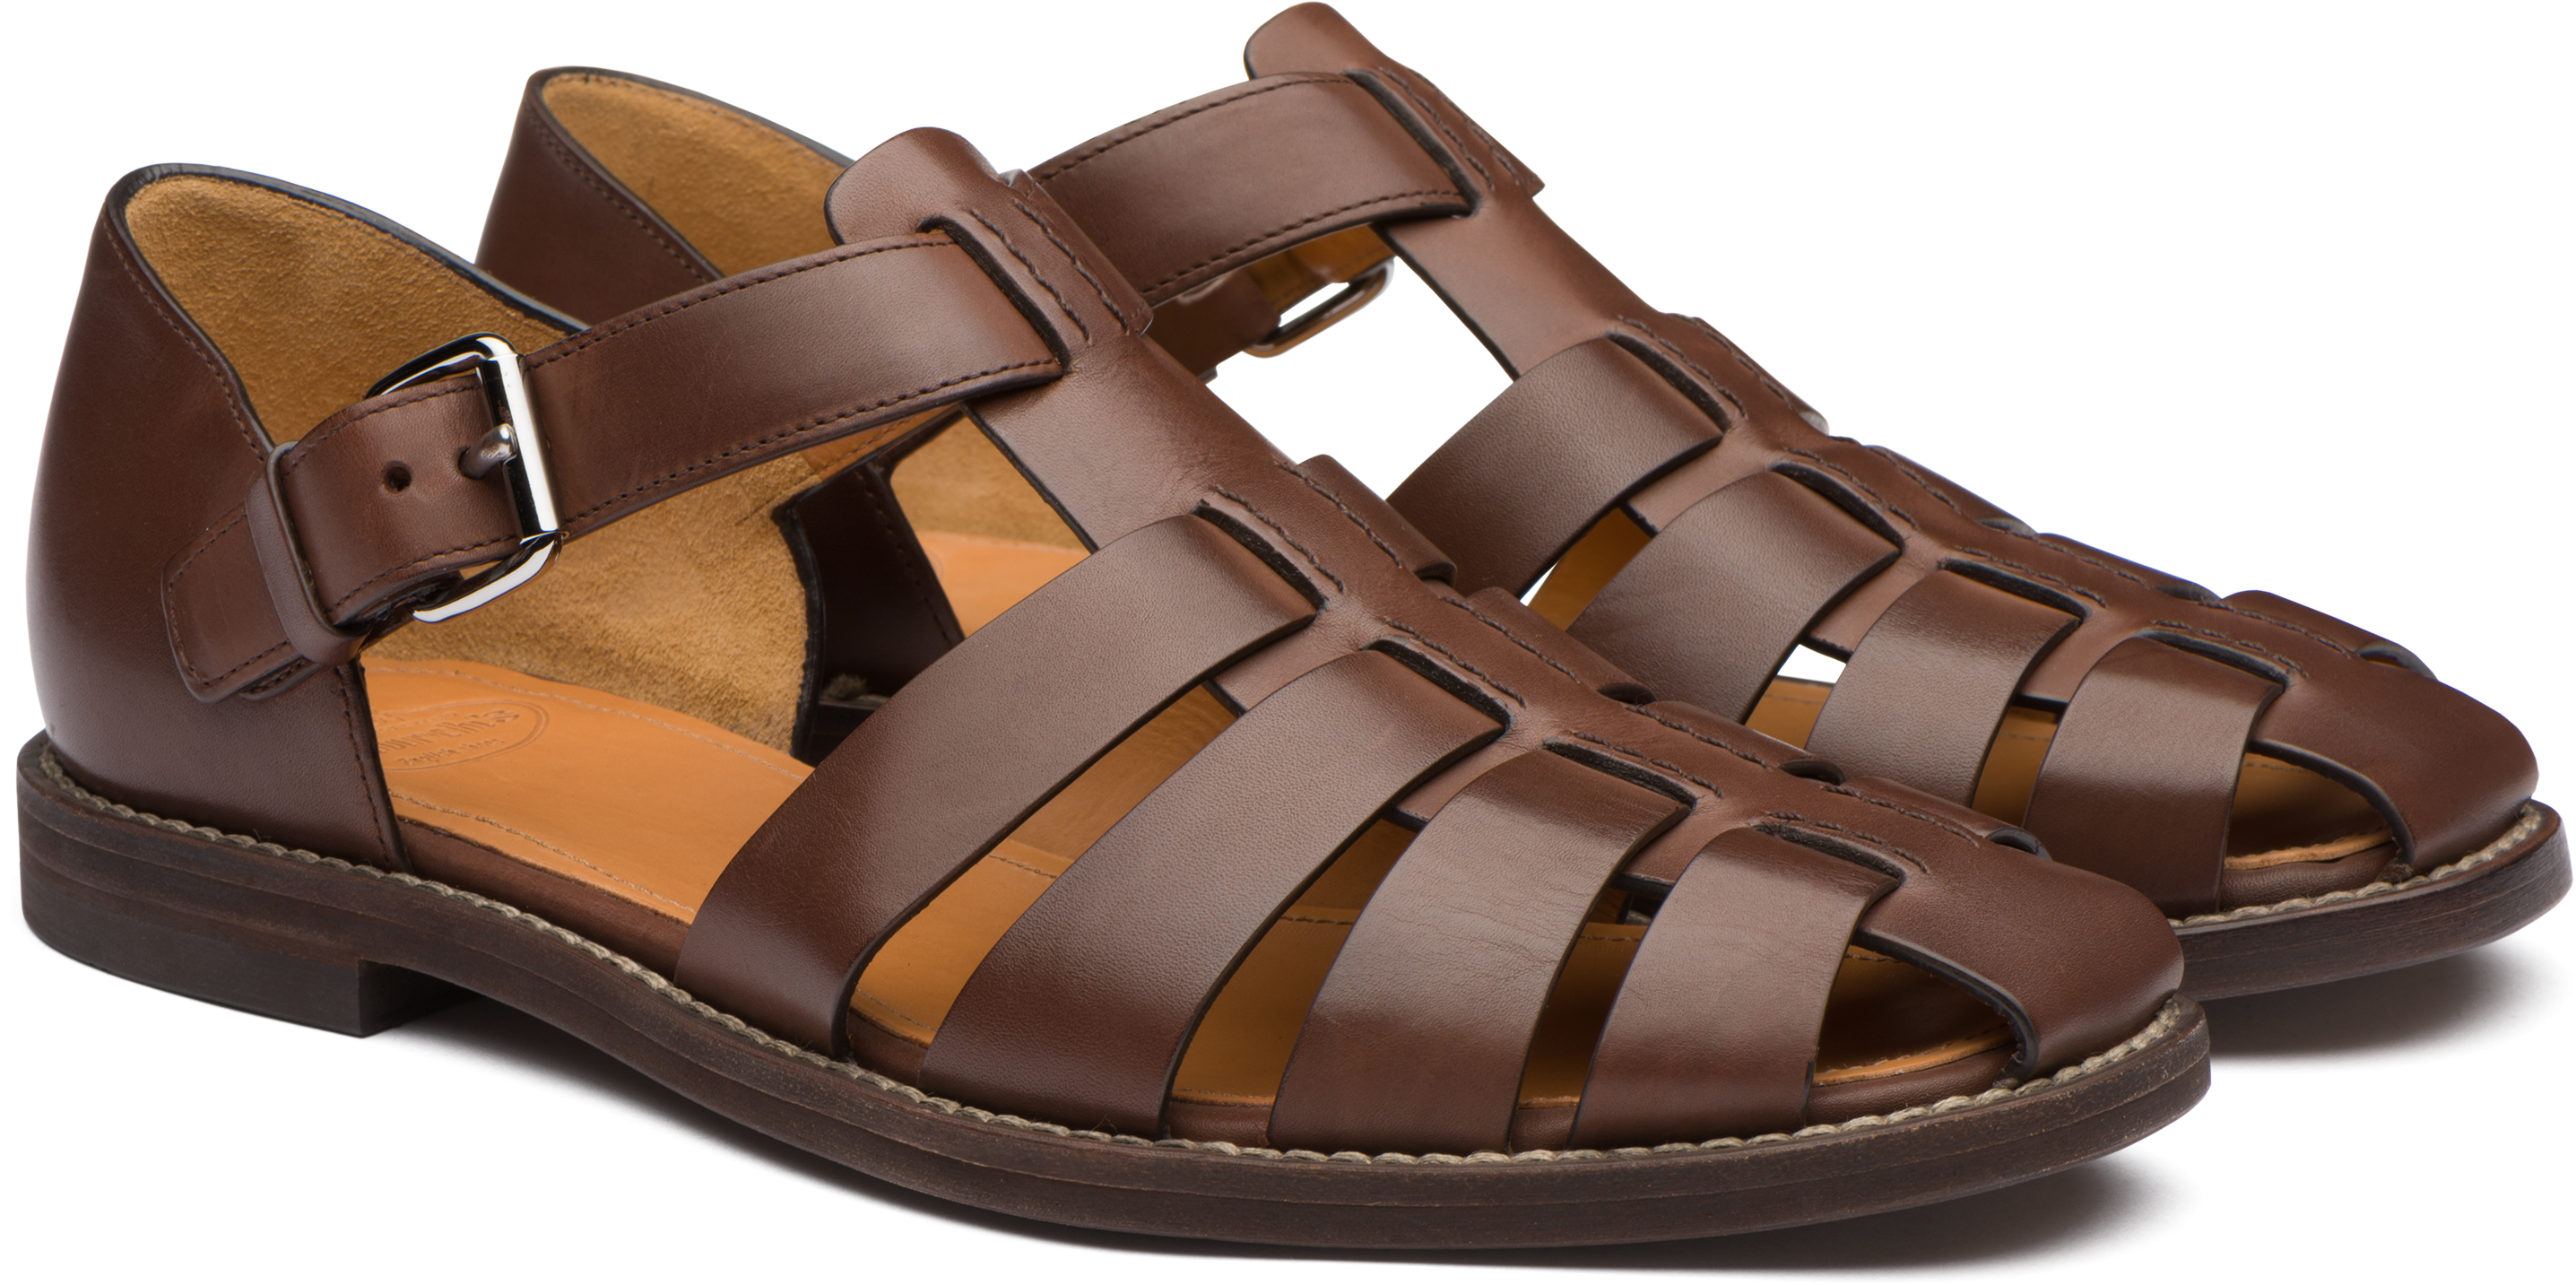 A Pair Of Brown Sandals